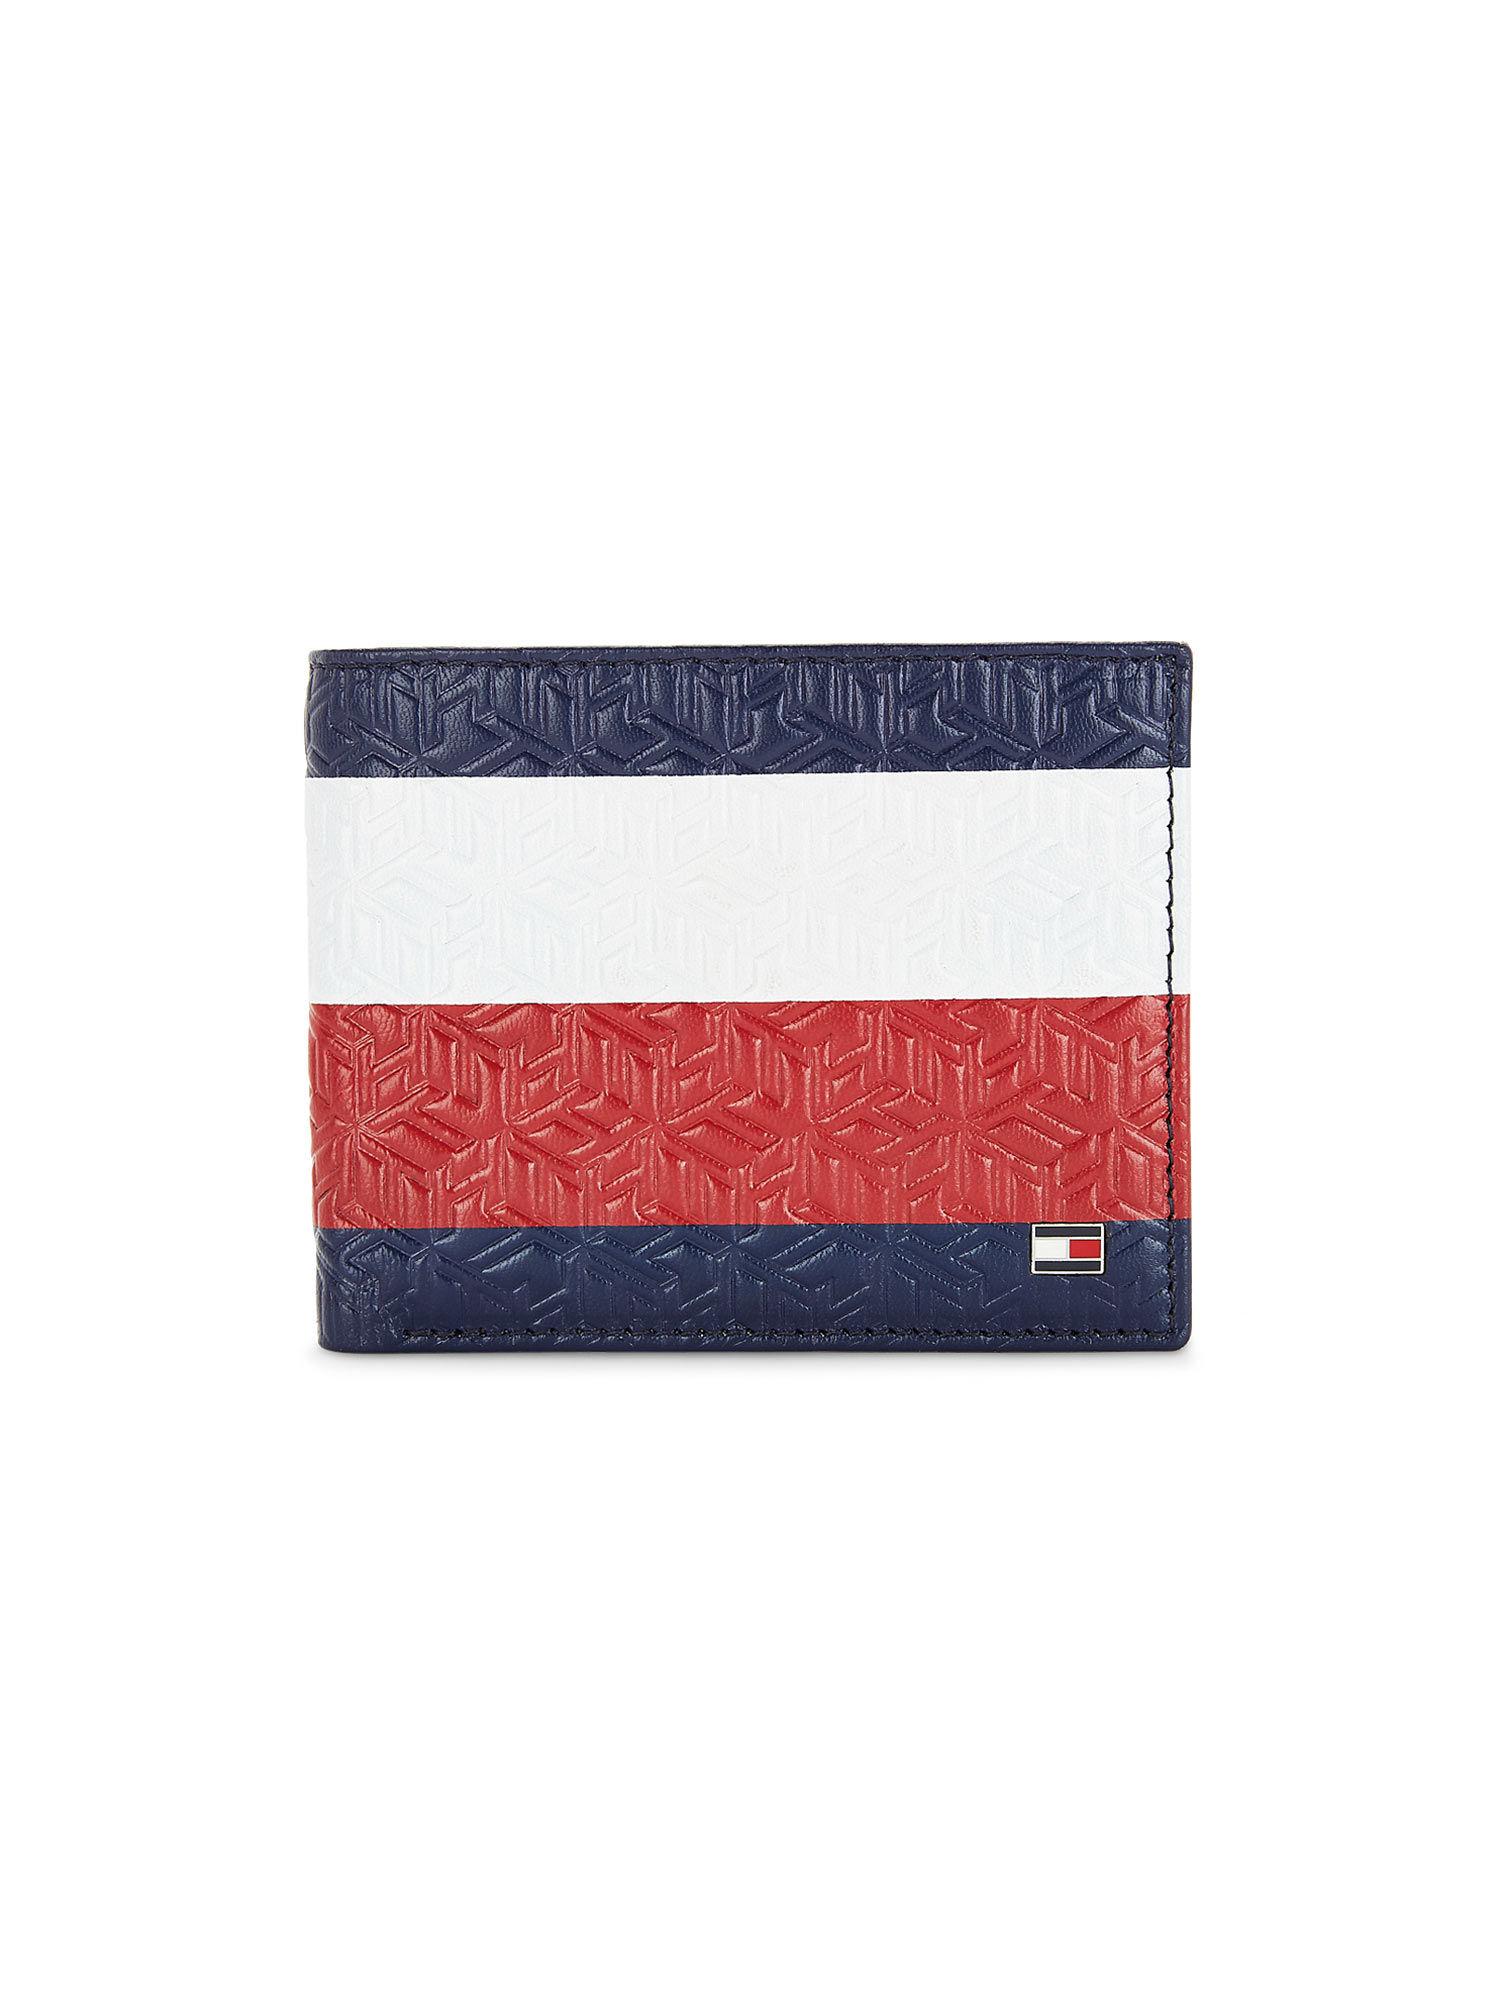 stellar-mens-leather-global-coin-wallet-red-&-white-&-blue